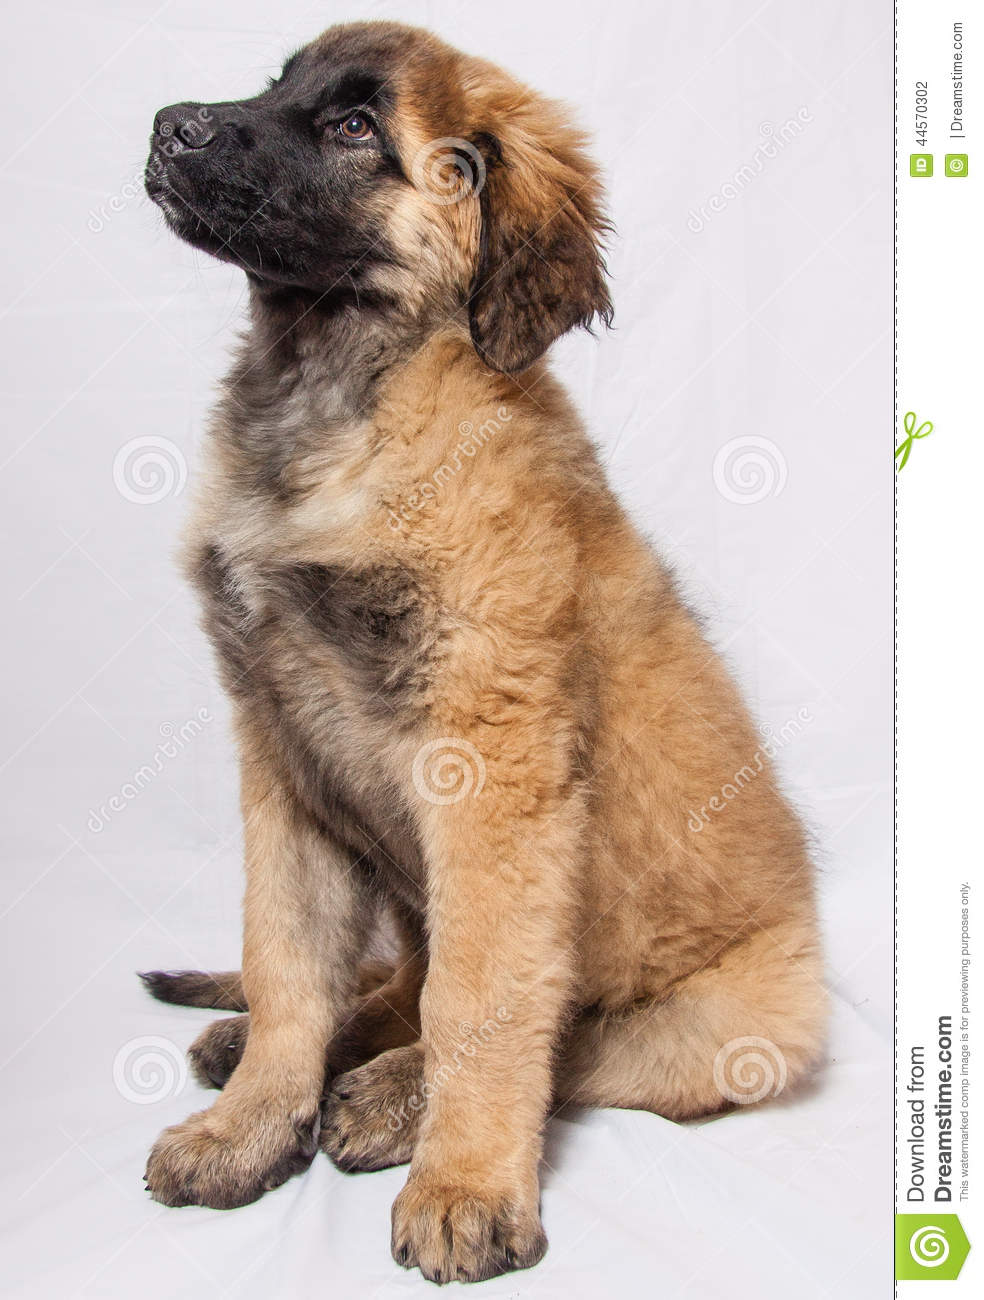 Leonberger clipart #11, Download drawings